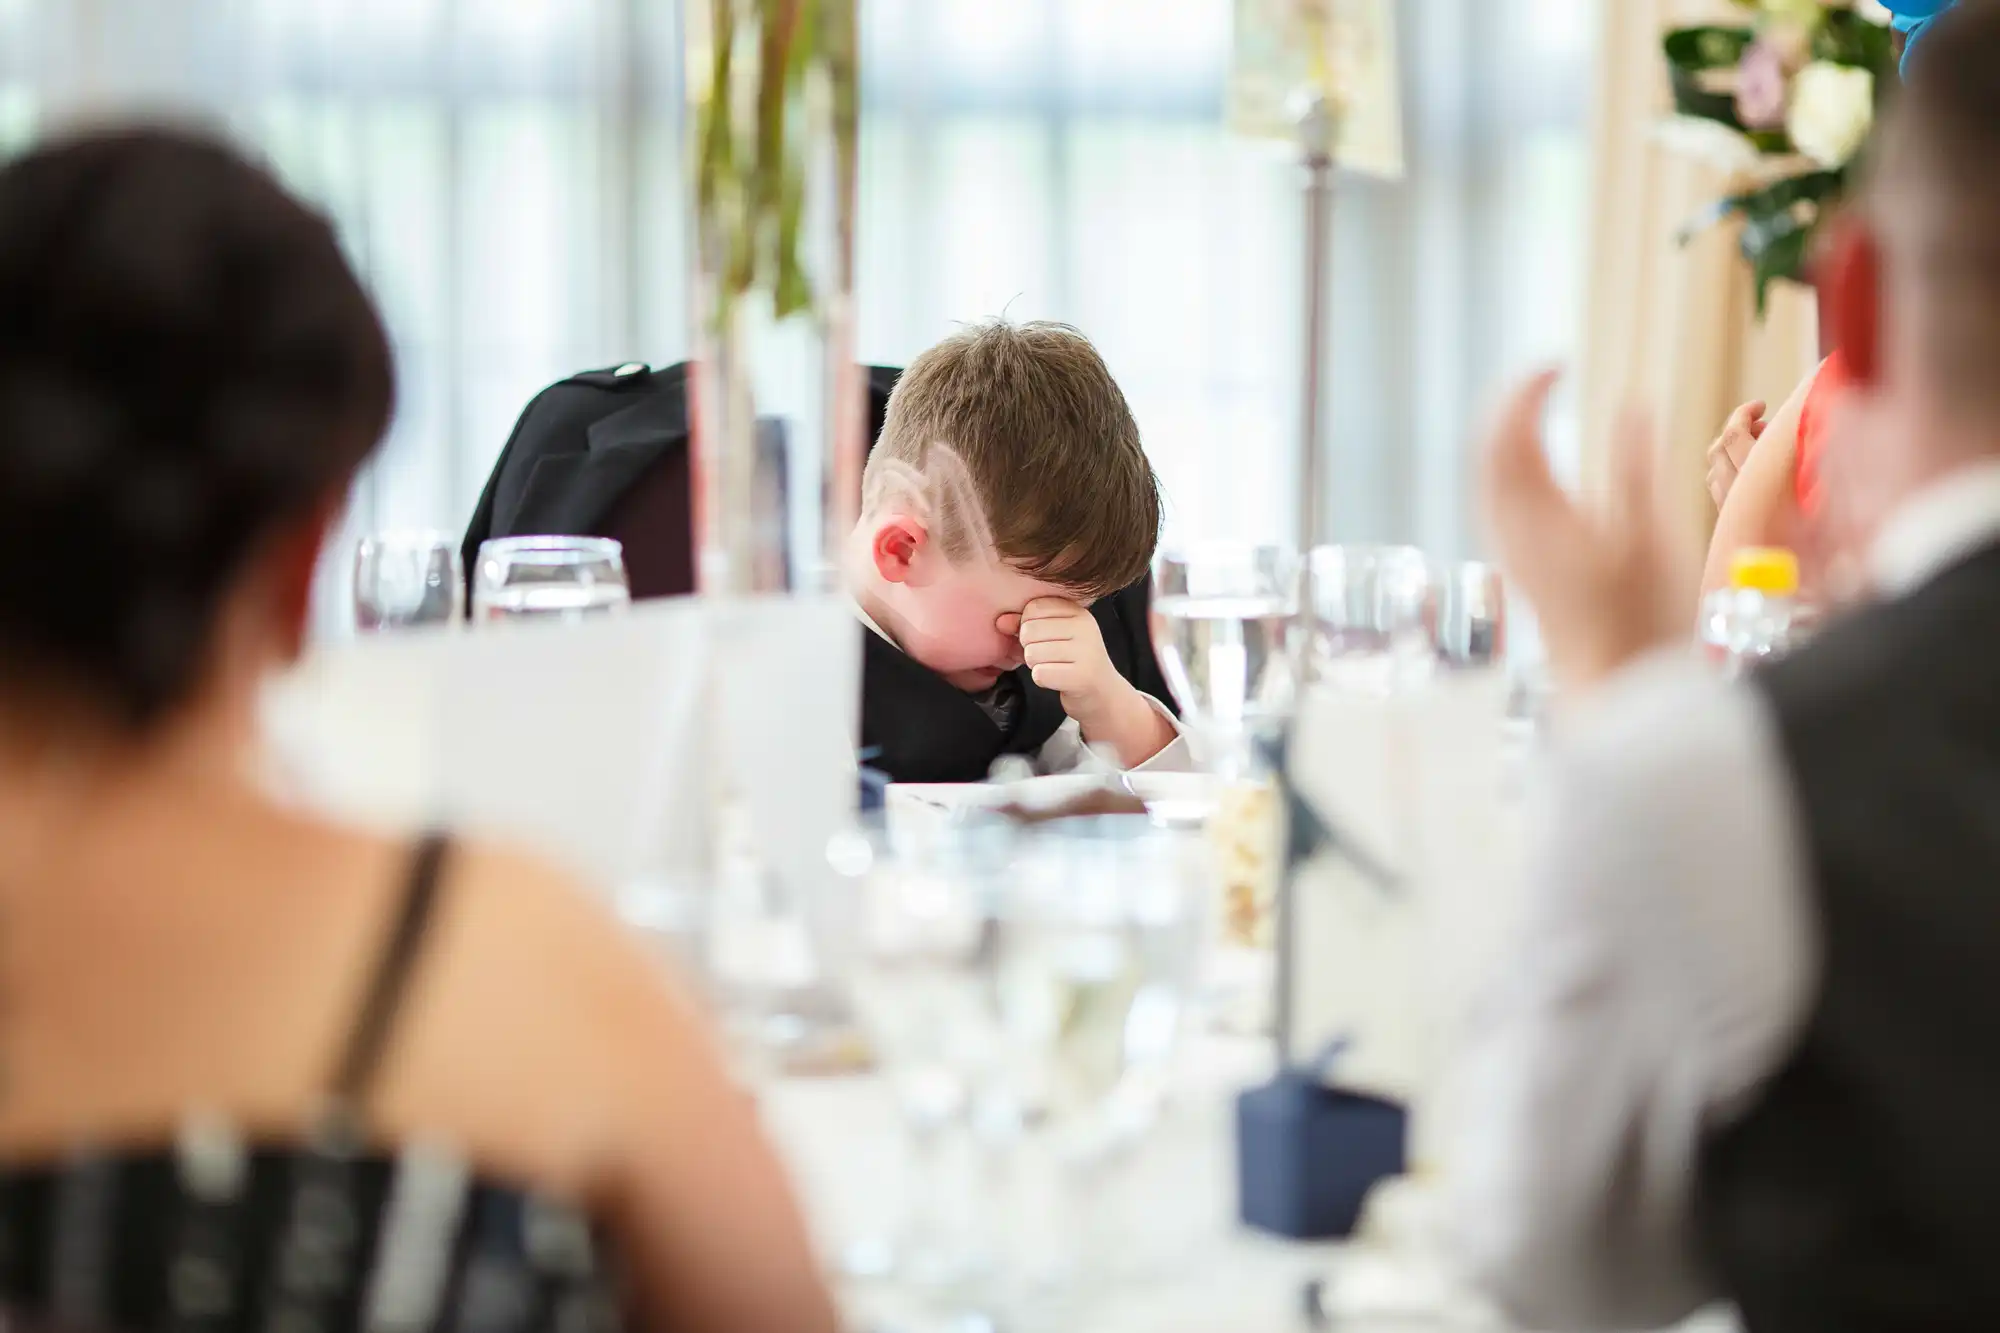 A young boy resting his head on his hand, looking bored or tired at a formal dining event. guests visible in the foreground.